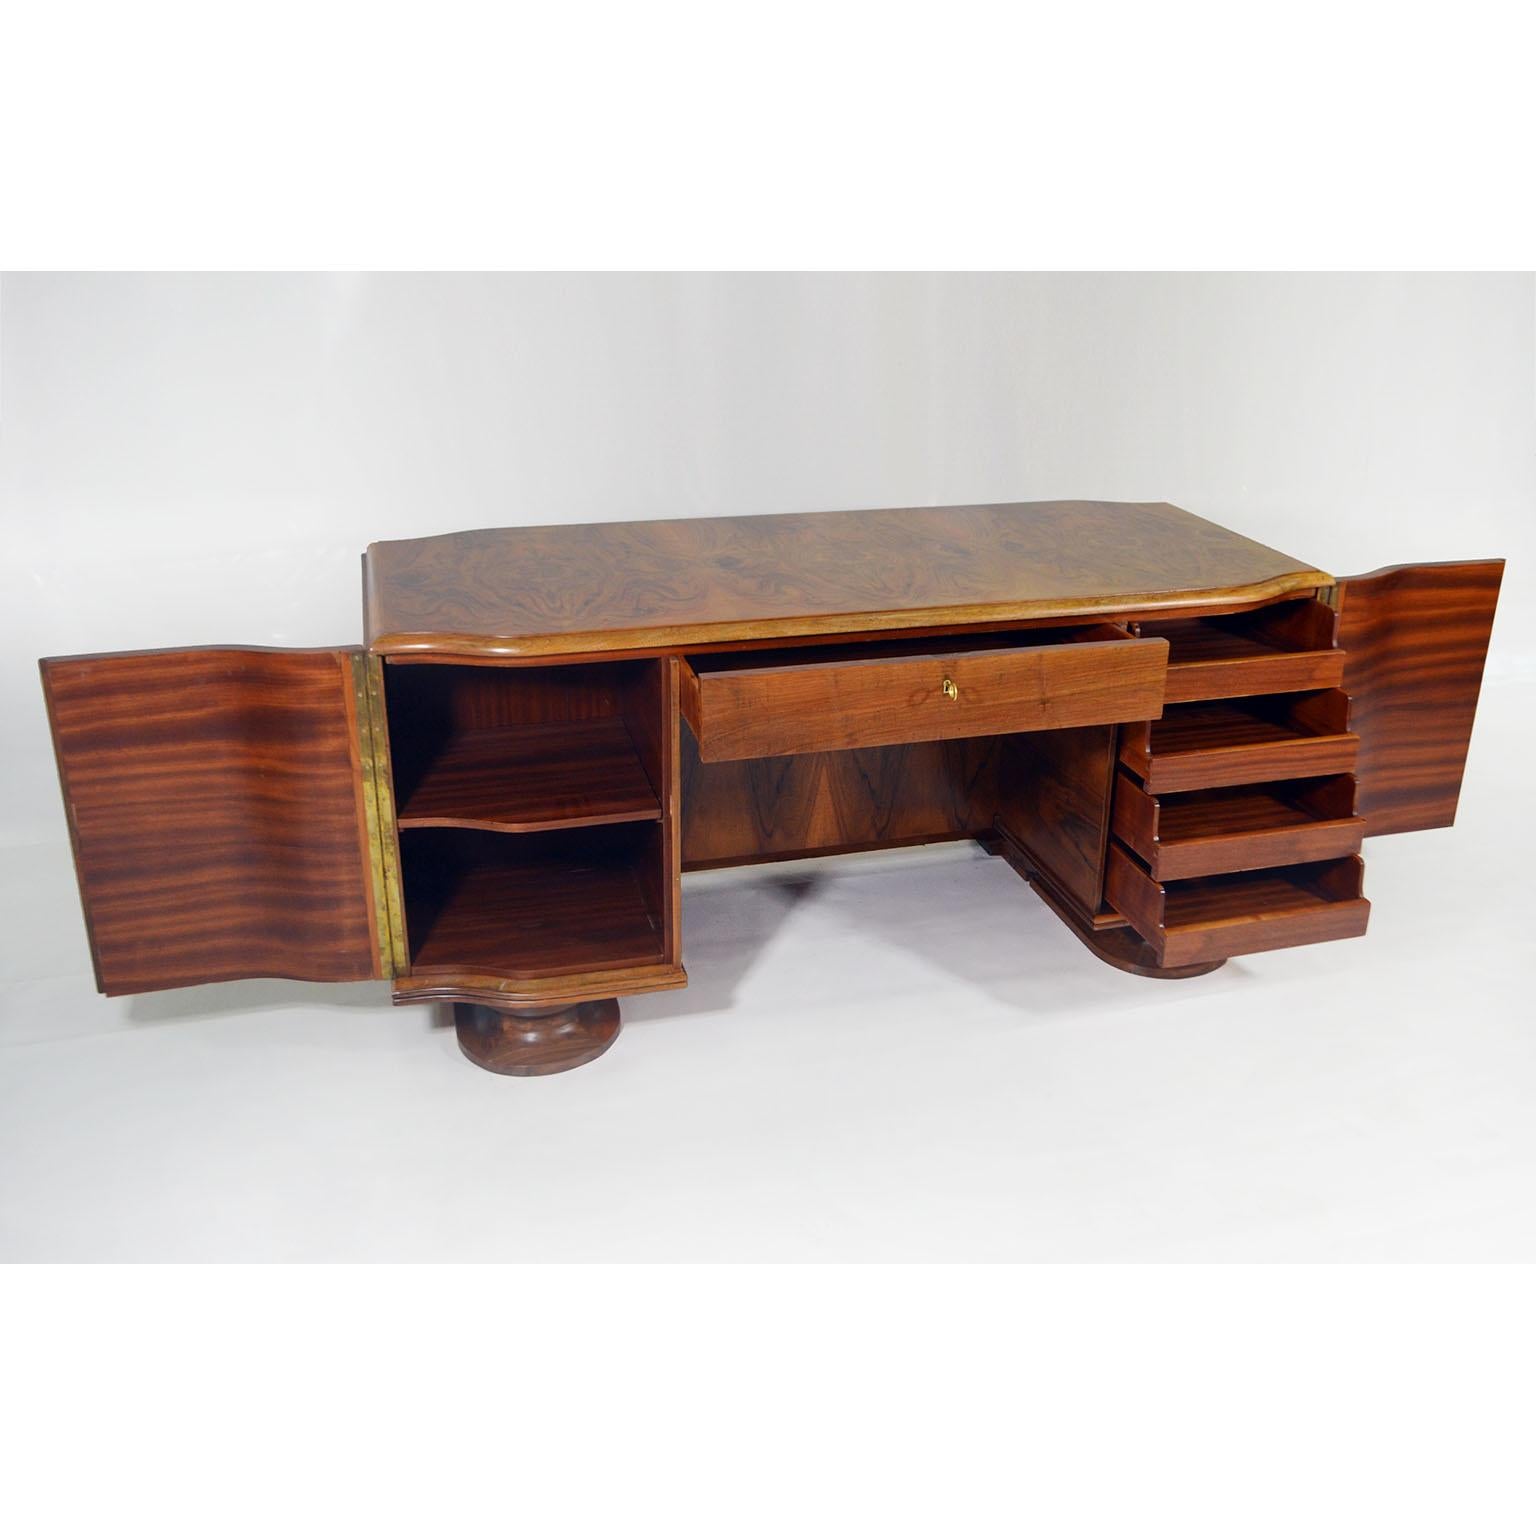 Exceptional Art Deco Desk in French Walnut and Mahogany 3